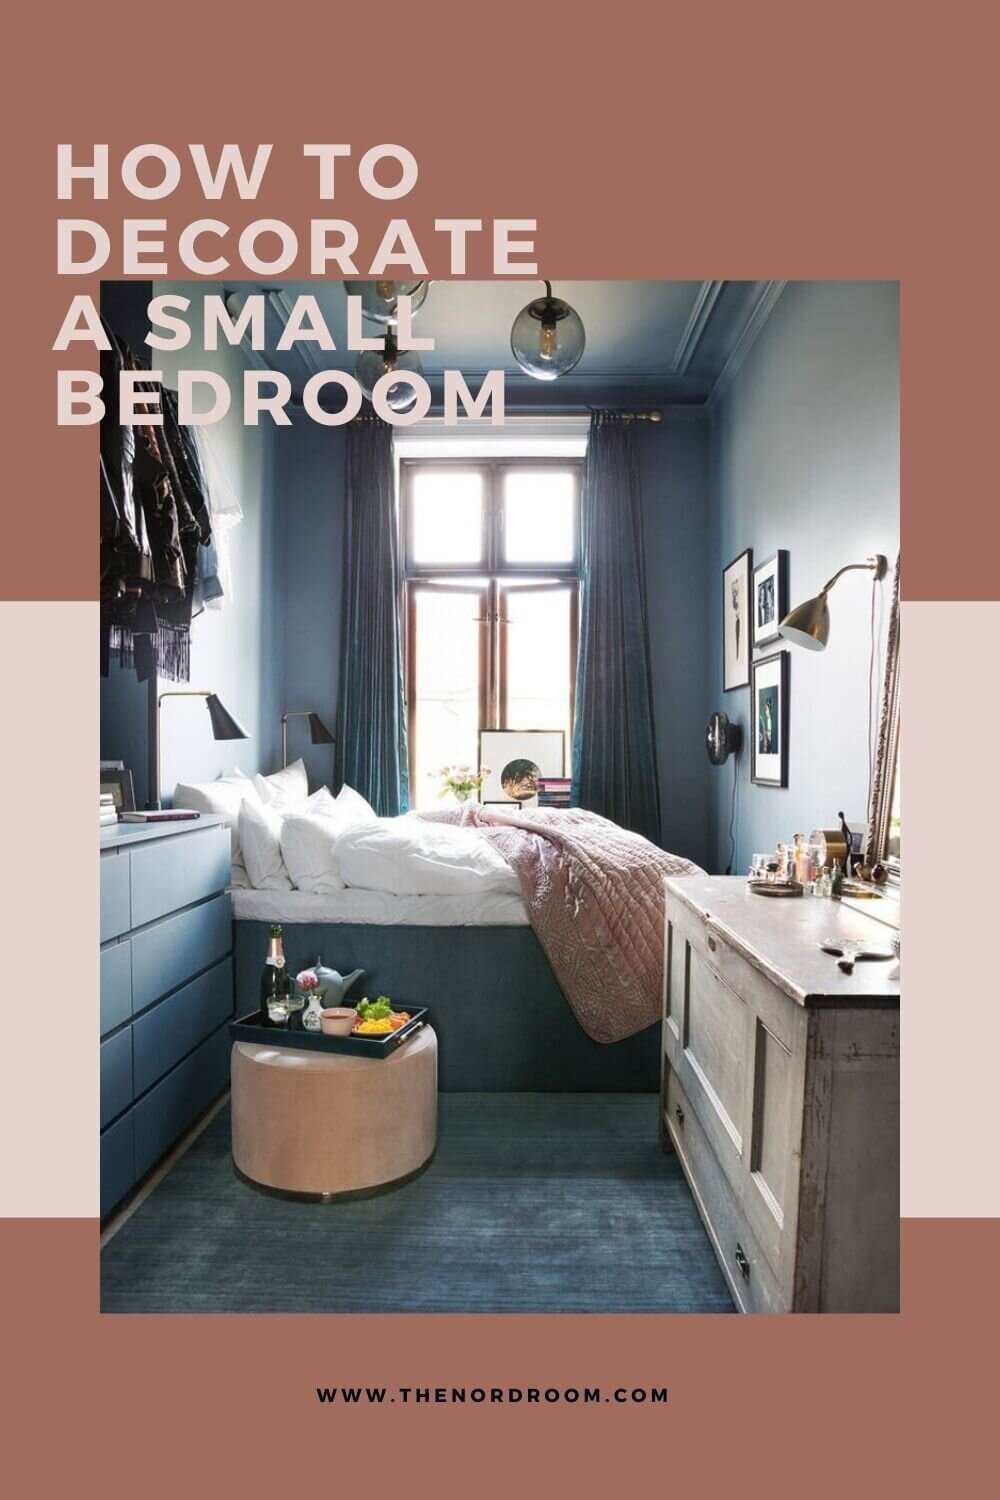 Small Bedroom Decorating Ideas That You’ll Love